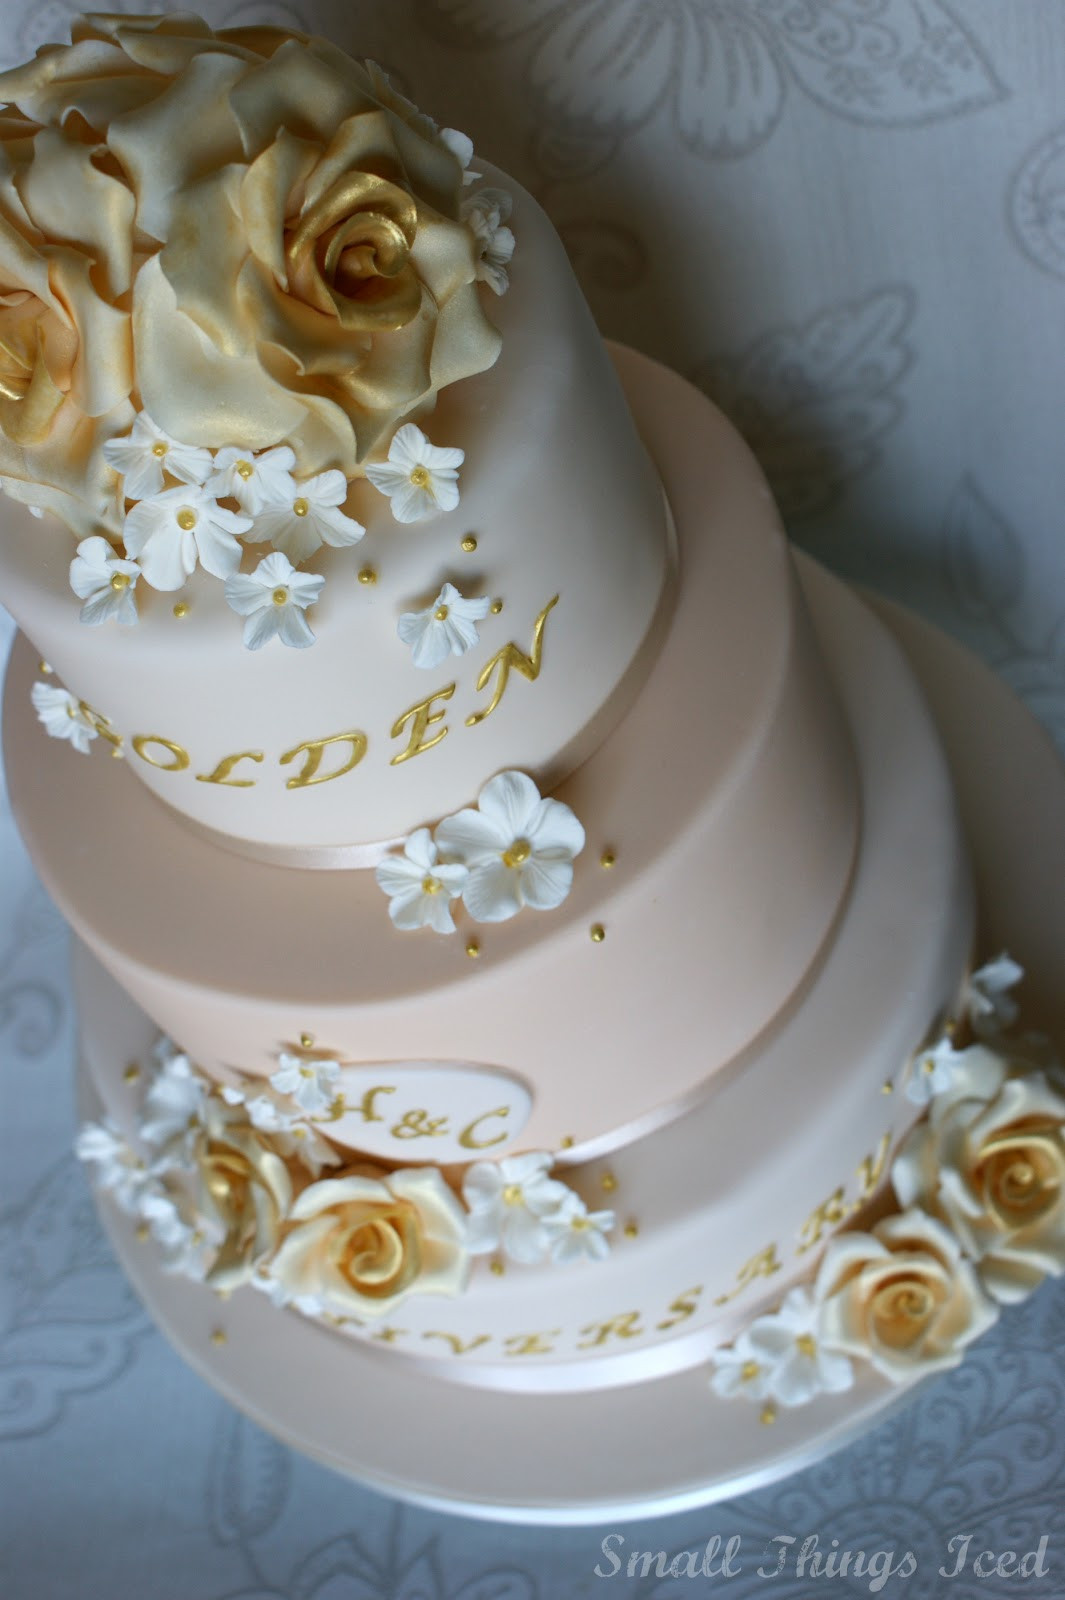 Golden Wedding Anniversary Cakes
 Small Things Iced Golden Wedding Anniversary Cake